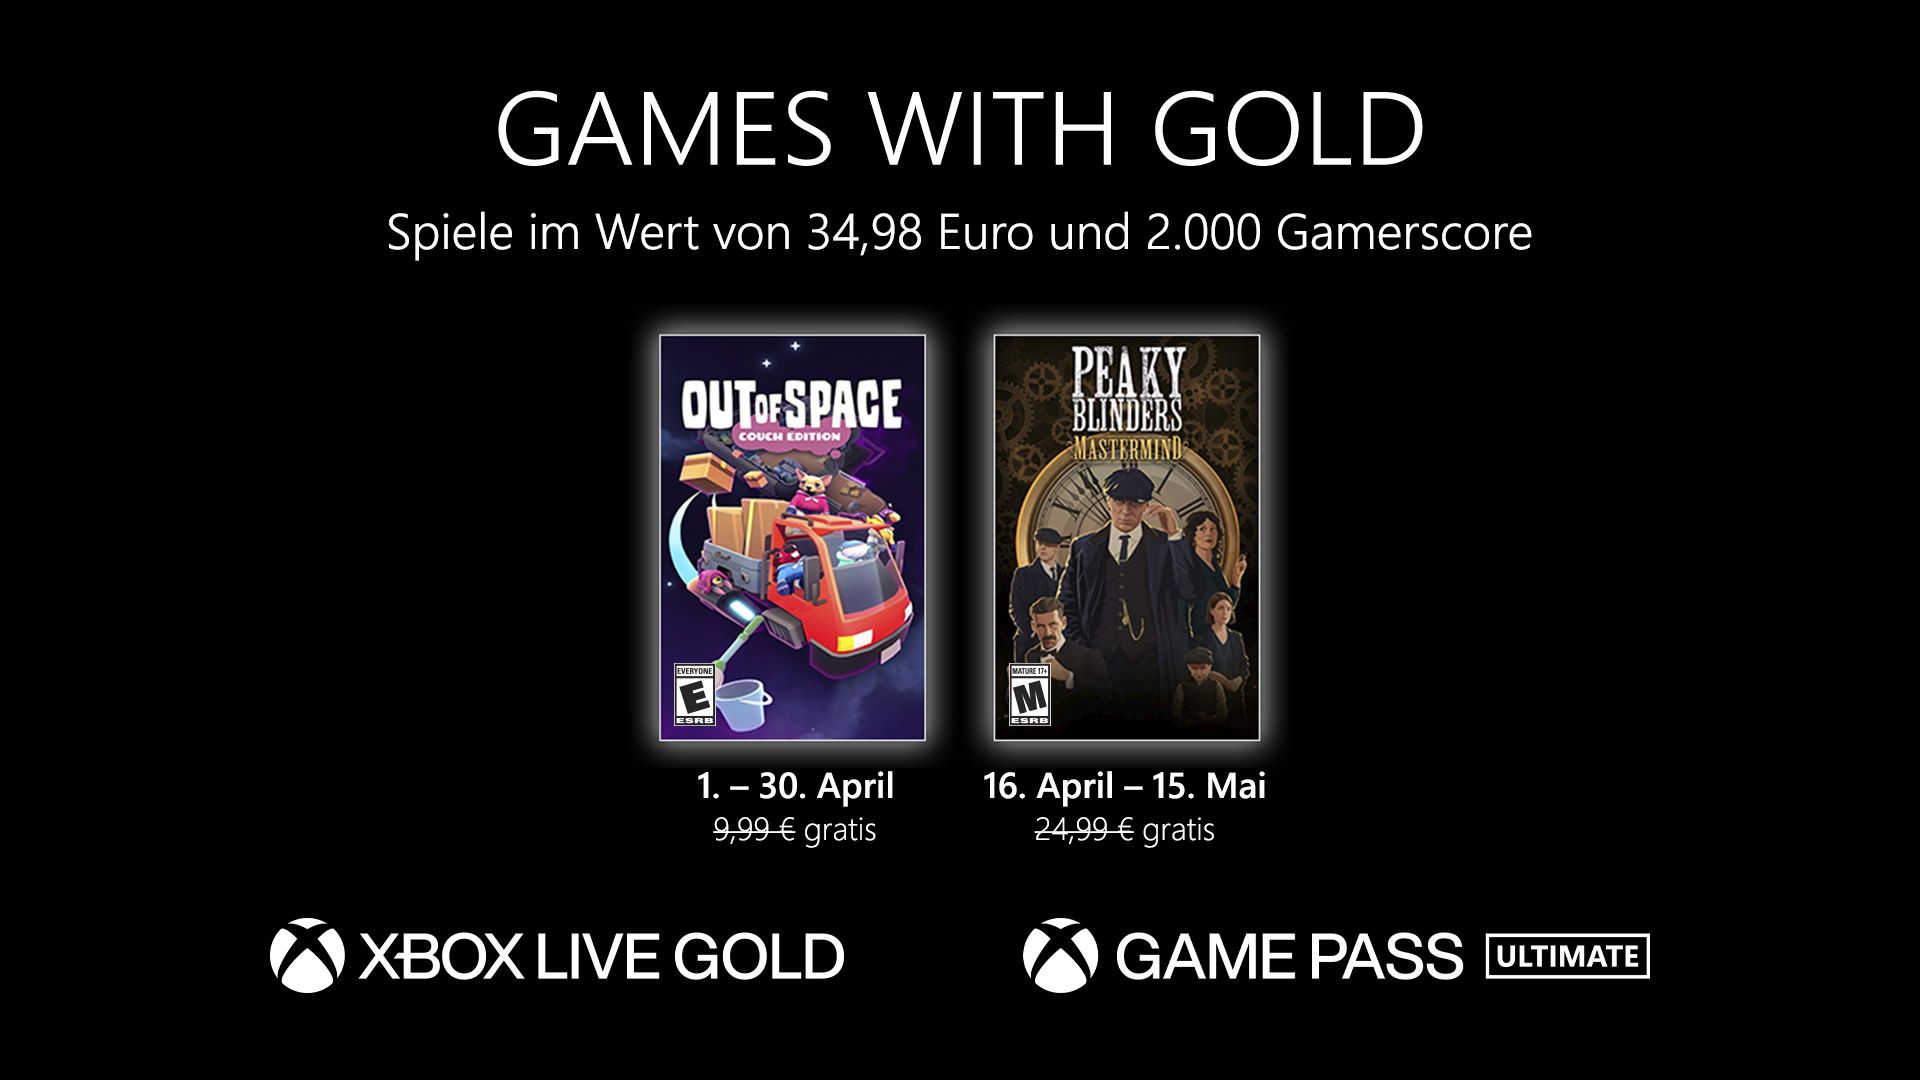 #Games with Gold im April mit Out of Space: Couch Edition und Peaky Blinders